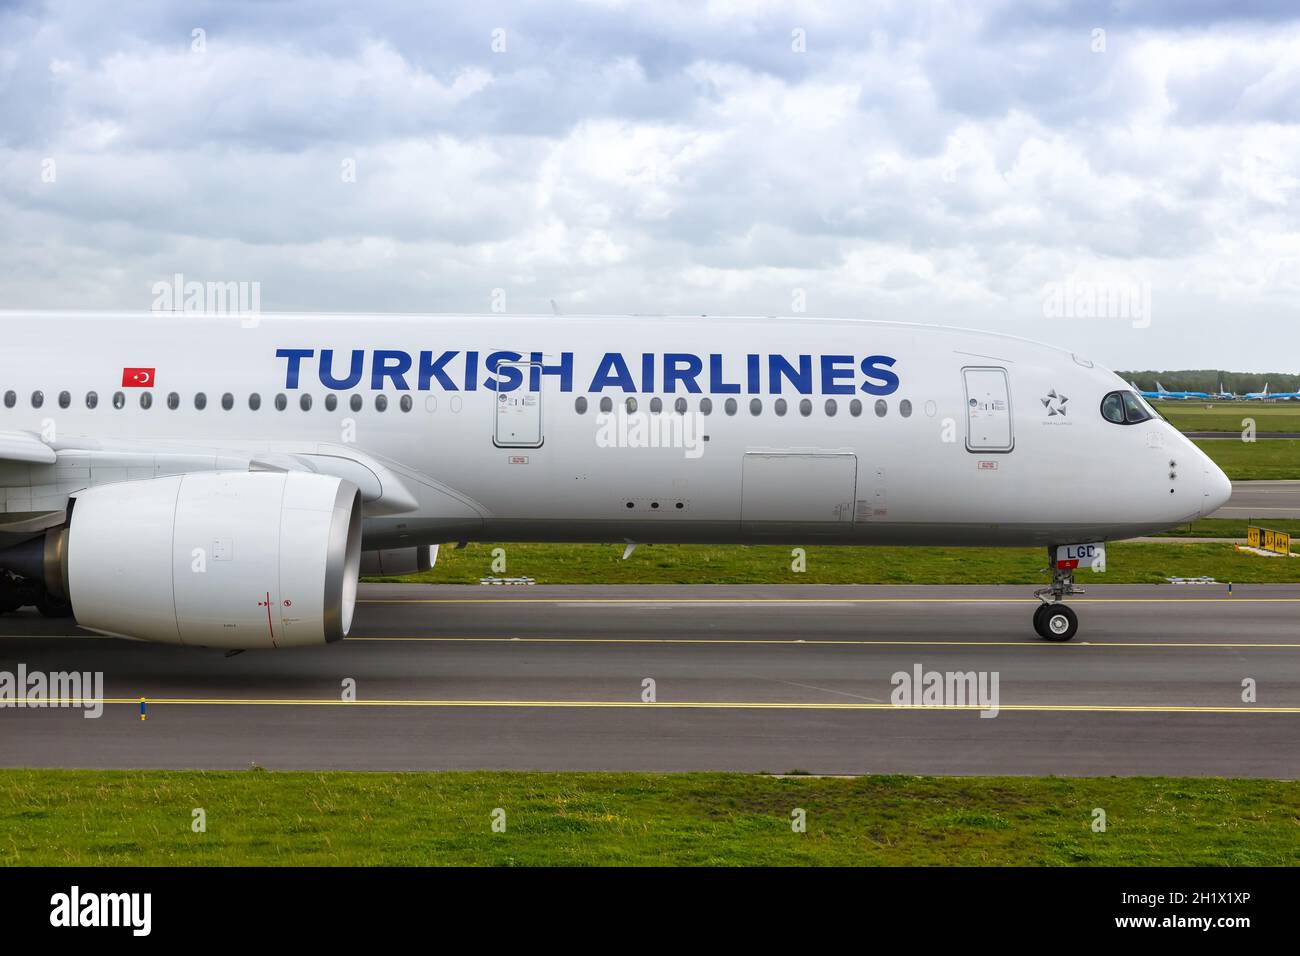 Amsterdam, Netherlands - May 21, 2021: Turkish Airlines Airbus A350-900 airplane at Amsterdam Schiphol airport (AMS) in the Netherlands. Stock Photo